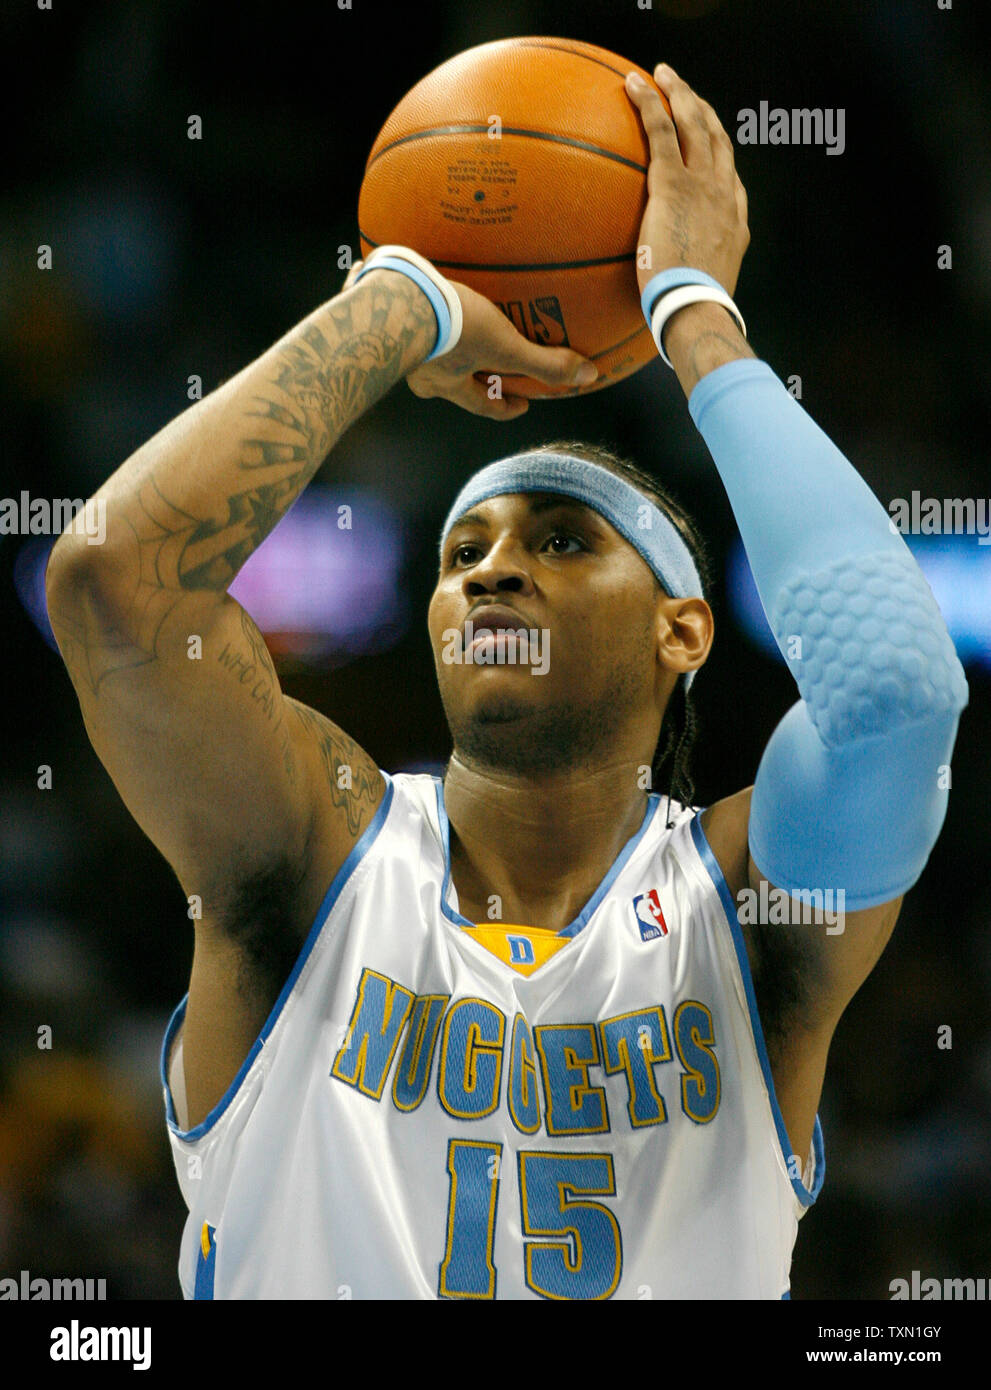 Denver Nuggets forward Carmelo Anthony shoots a free throw with seven second left in the second half against the Los Angeles Lakers at the Pepsi Center in Denver April 9, 2007.  Anthony was 9-10 from the free throw line and led all scorers with 33 points.  Denver beat Los Angeles 115-111.    (UPI Photo/Gary C. Caskey) Stock Photo